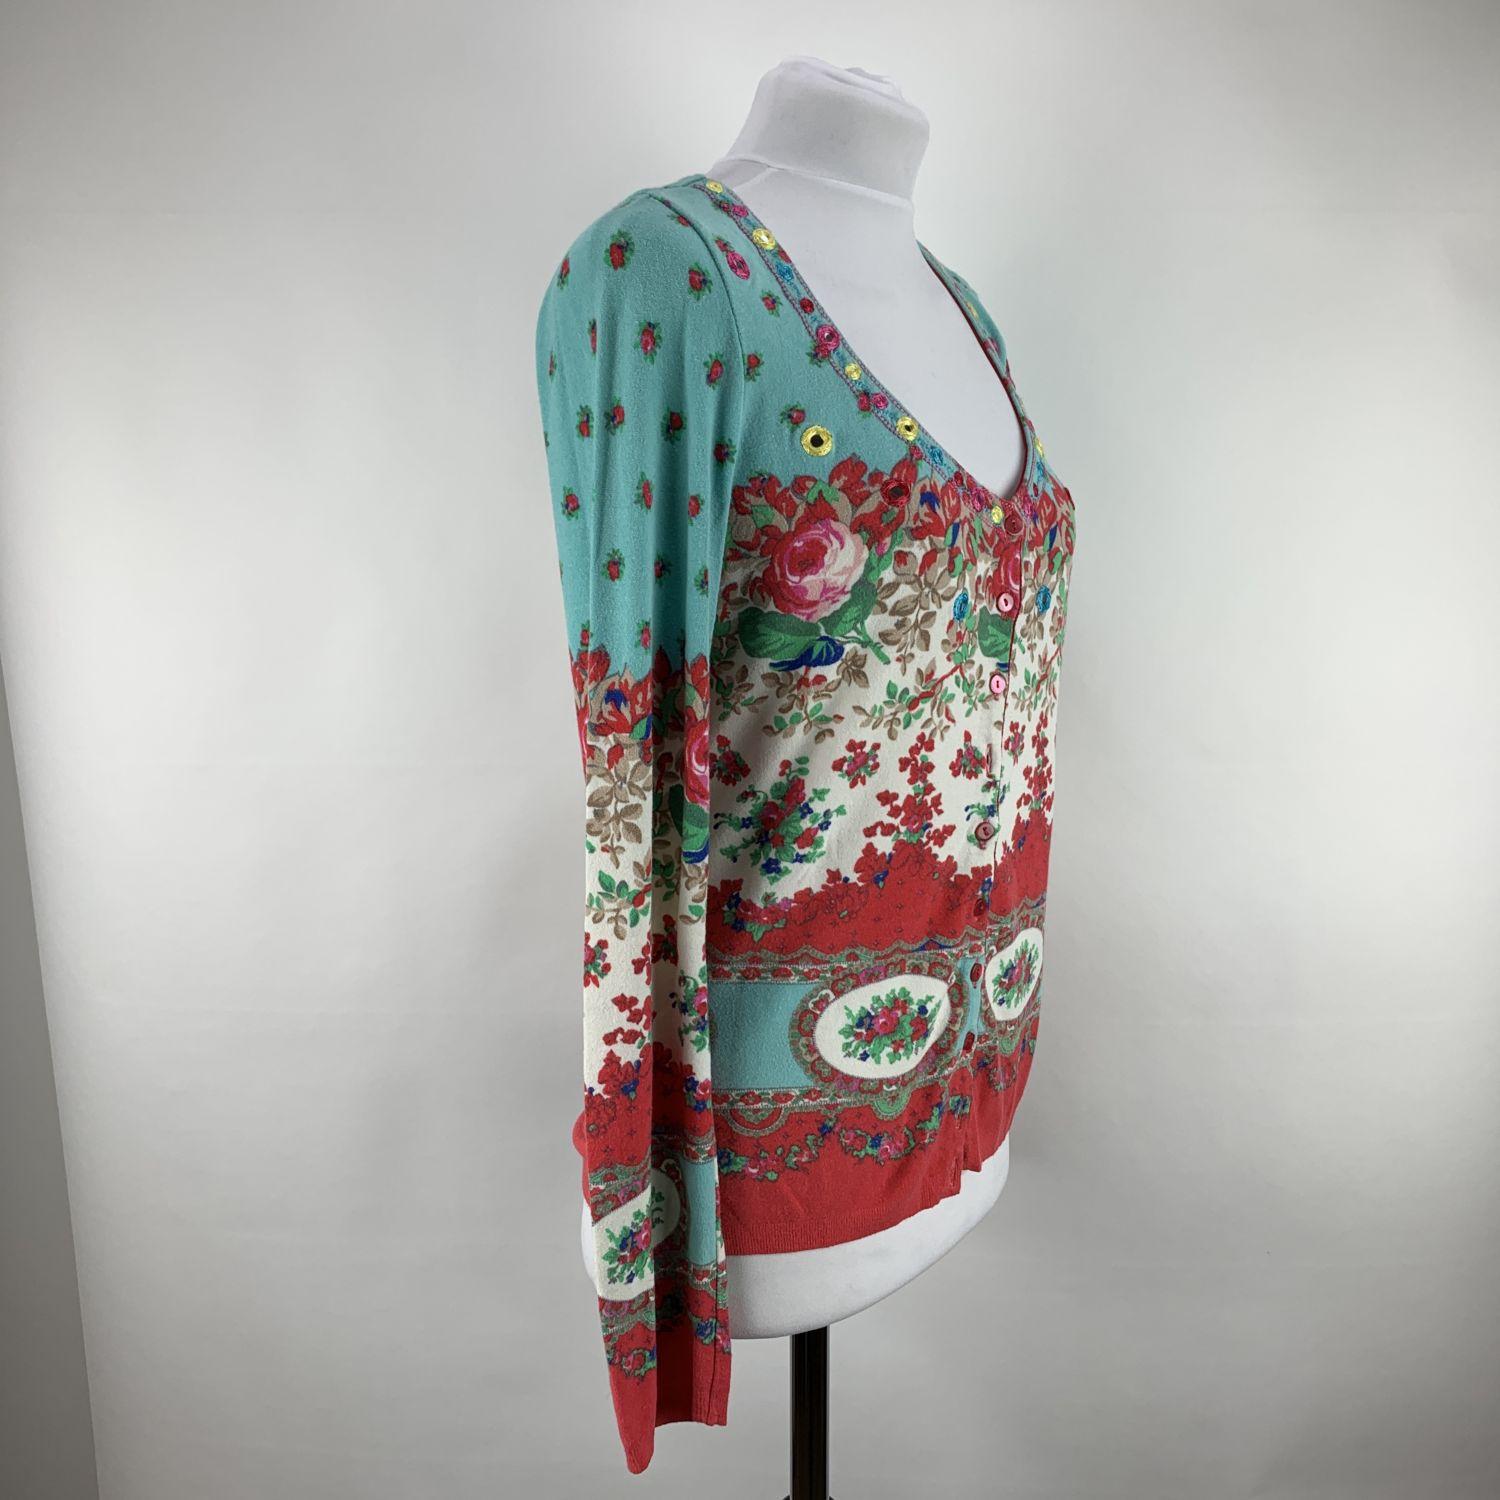 Blumarine multicolored floral cardigan. Small mirror embellishment. Button closure on the front. Composition: 95% Rayon, 5% Spandex. Size: 44 IT, 38 D (The size shown for this item is the size indicated by the designer on the label). It should